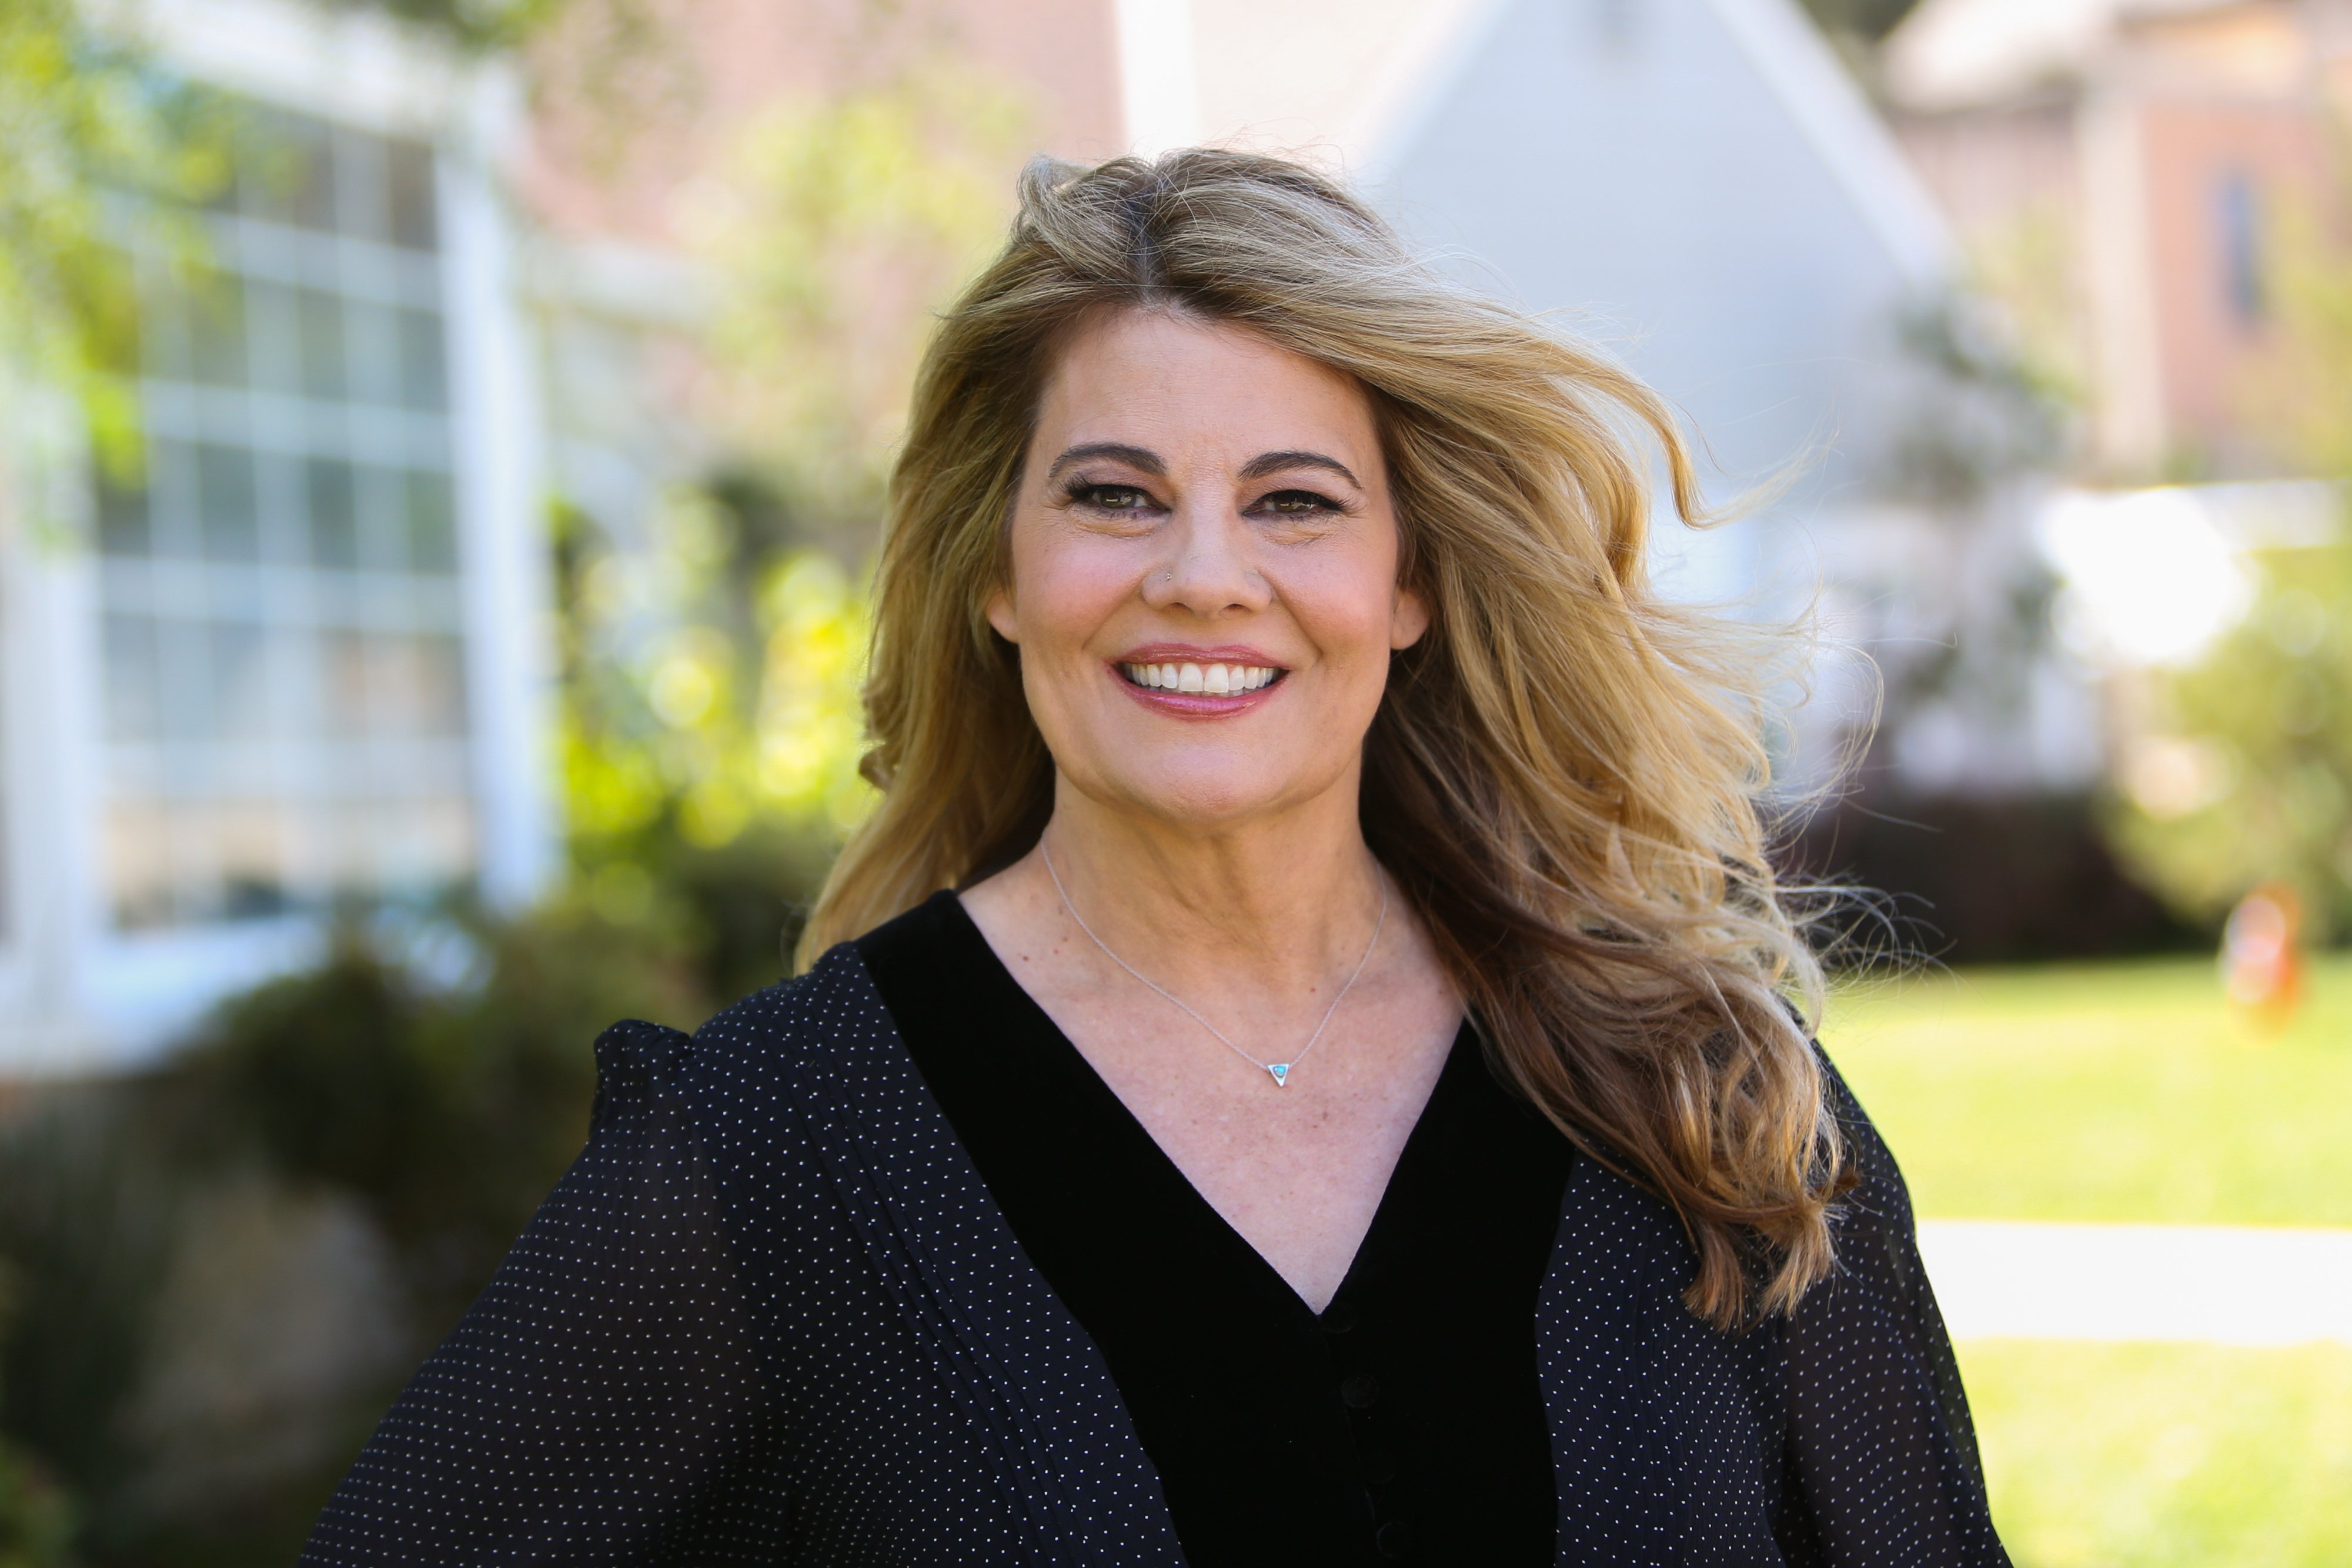 Actress Lisa Whelchel as Blair Warner in "The Facts Of Life"  | Source: Getty Images